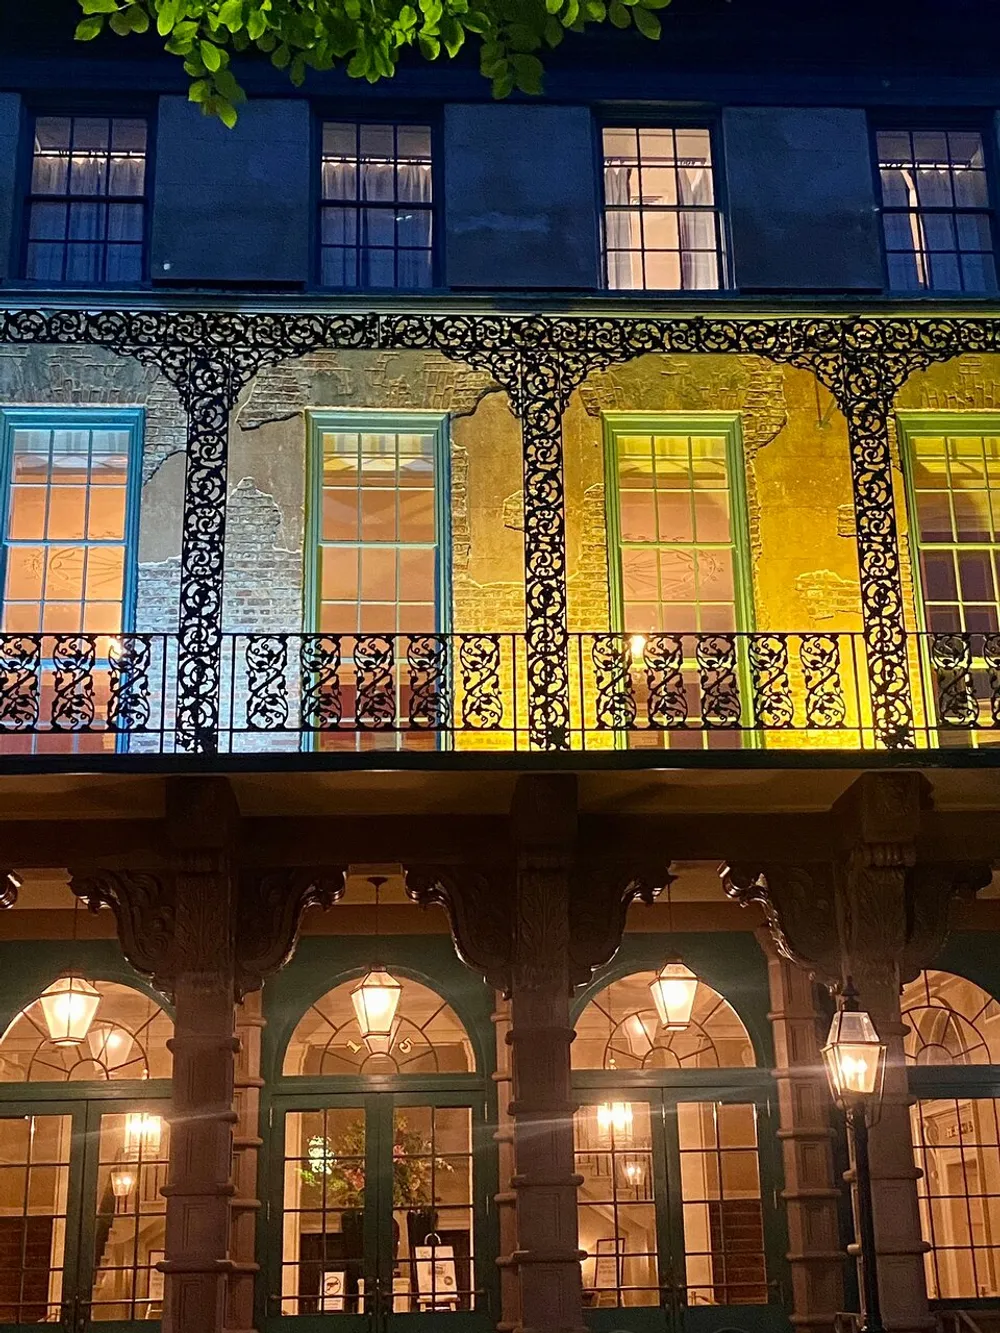 The image shows the illuminated facade of a building at night characterized by its ornate iron balcony railings and contrasting window lighting